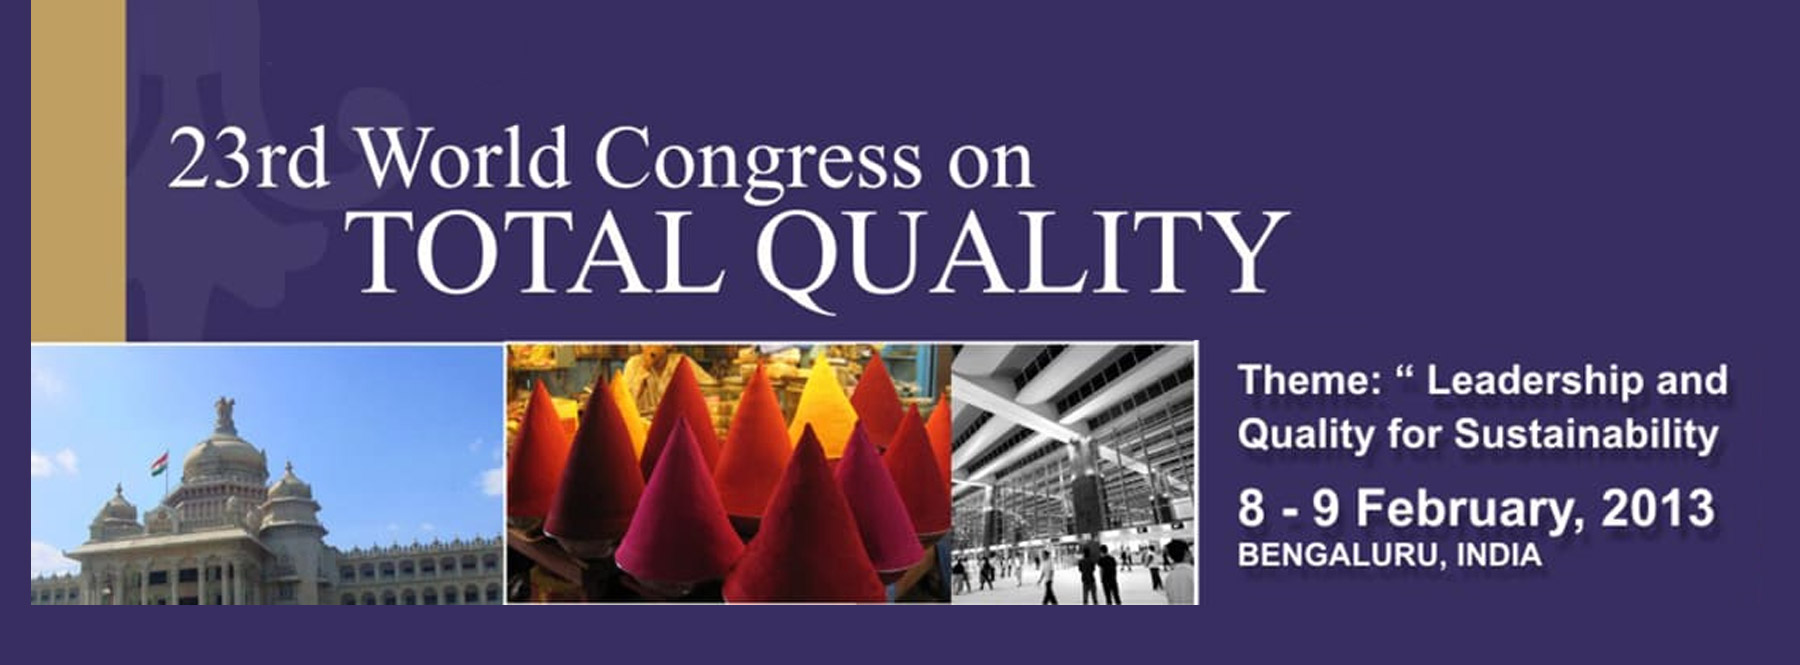 23rd World Congress on TOTAL QUALITY